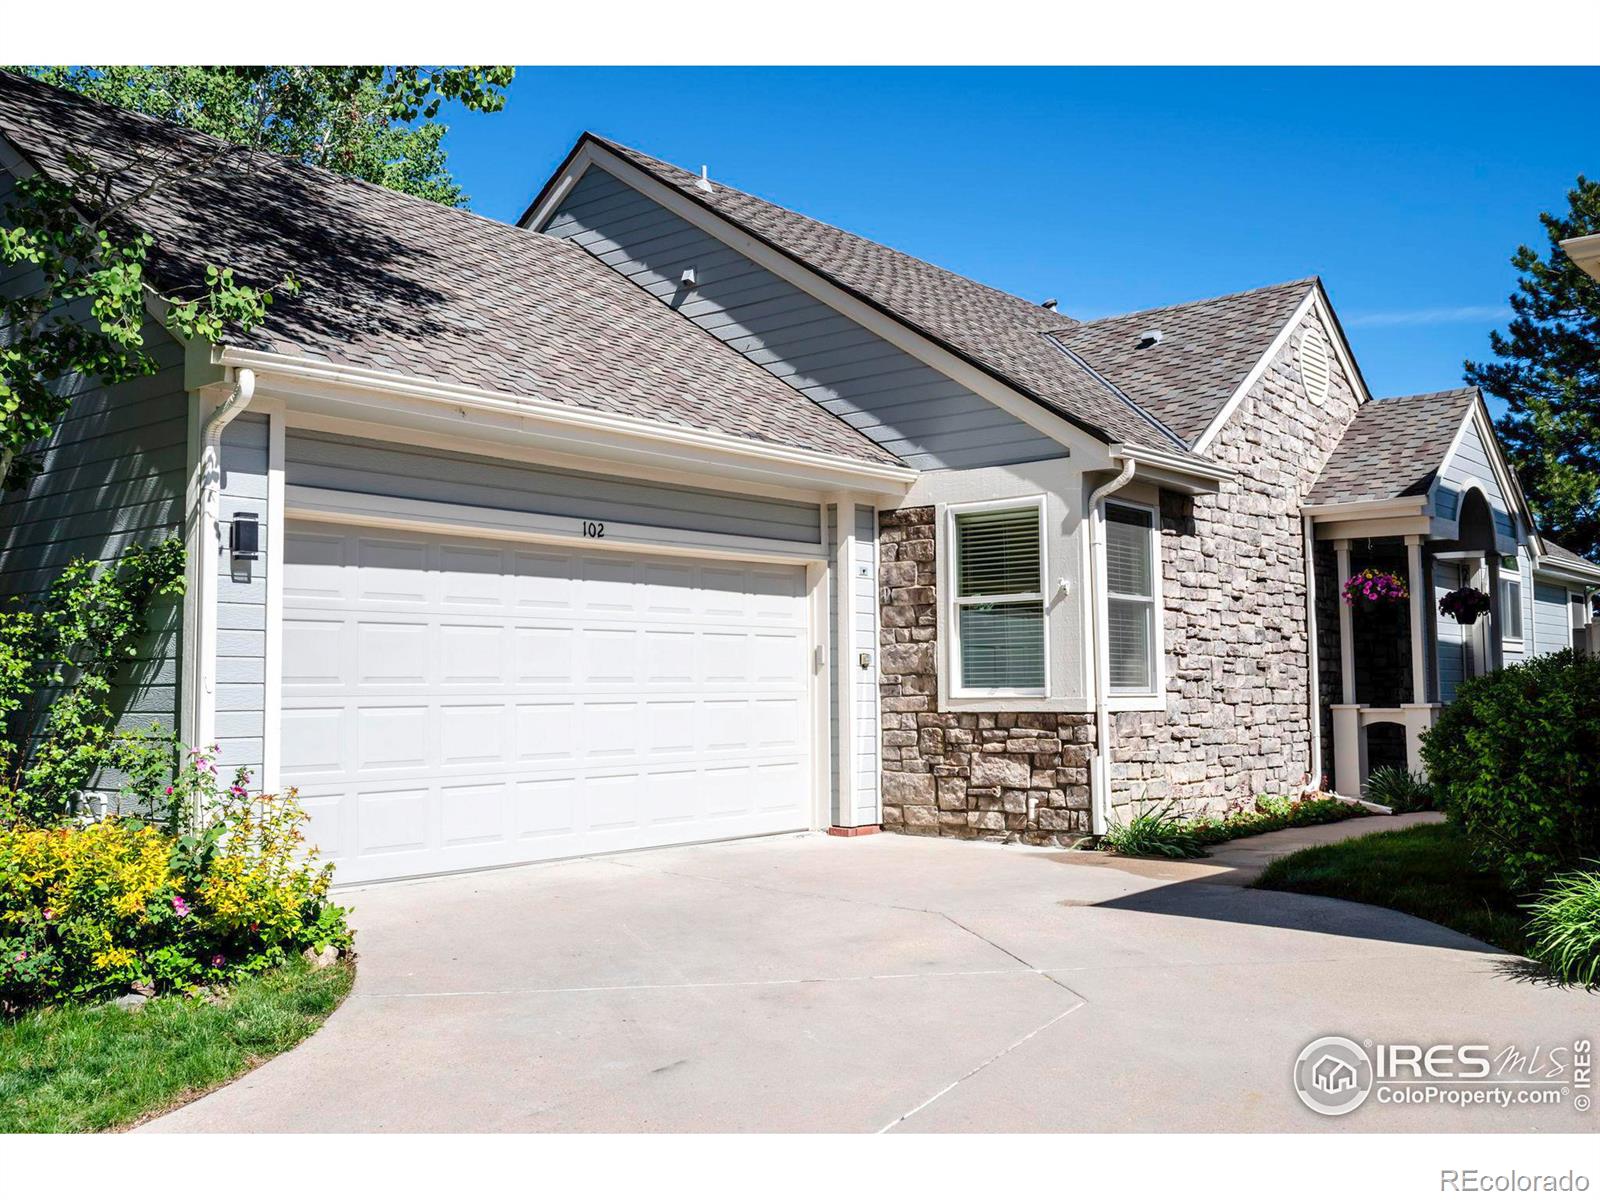 Report Image for 102  Springs Cove,Louisville, Colorado